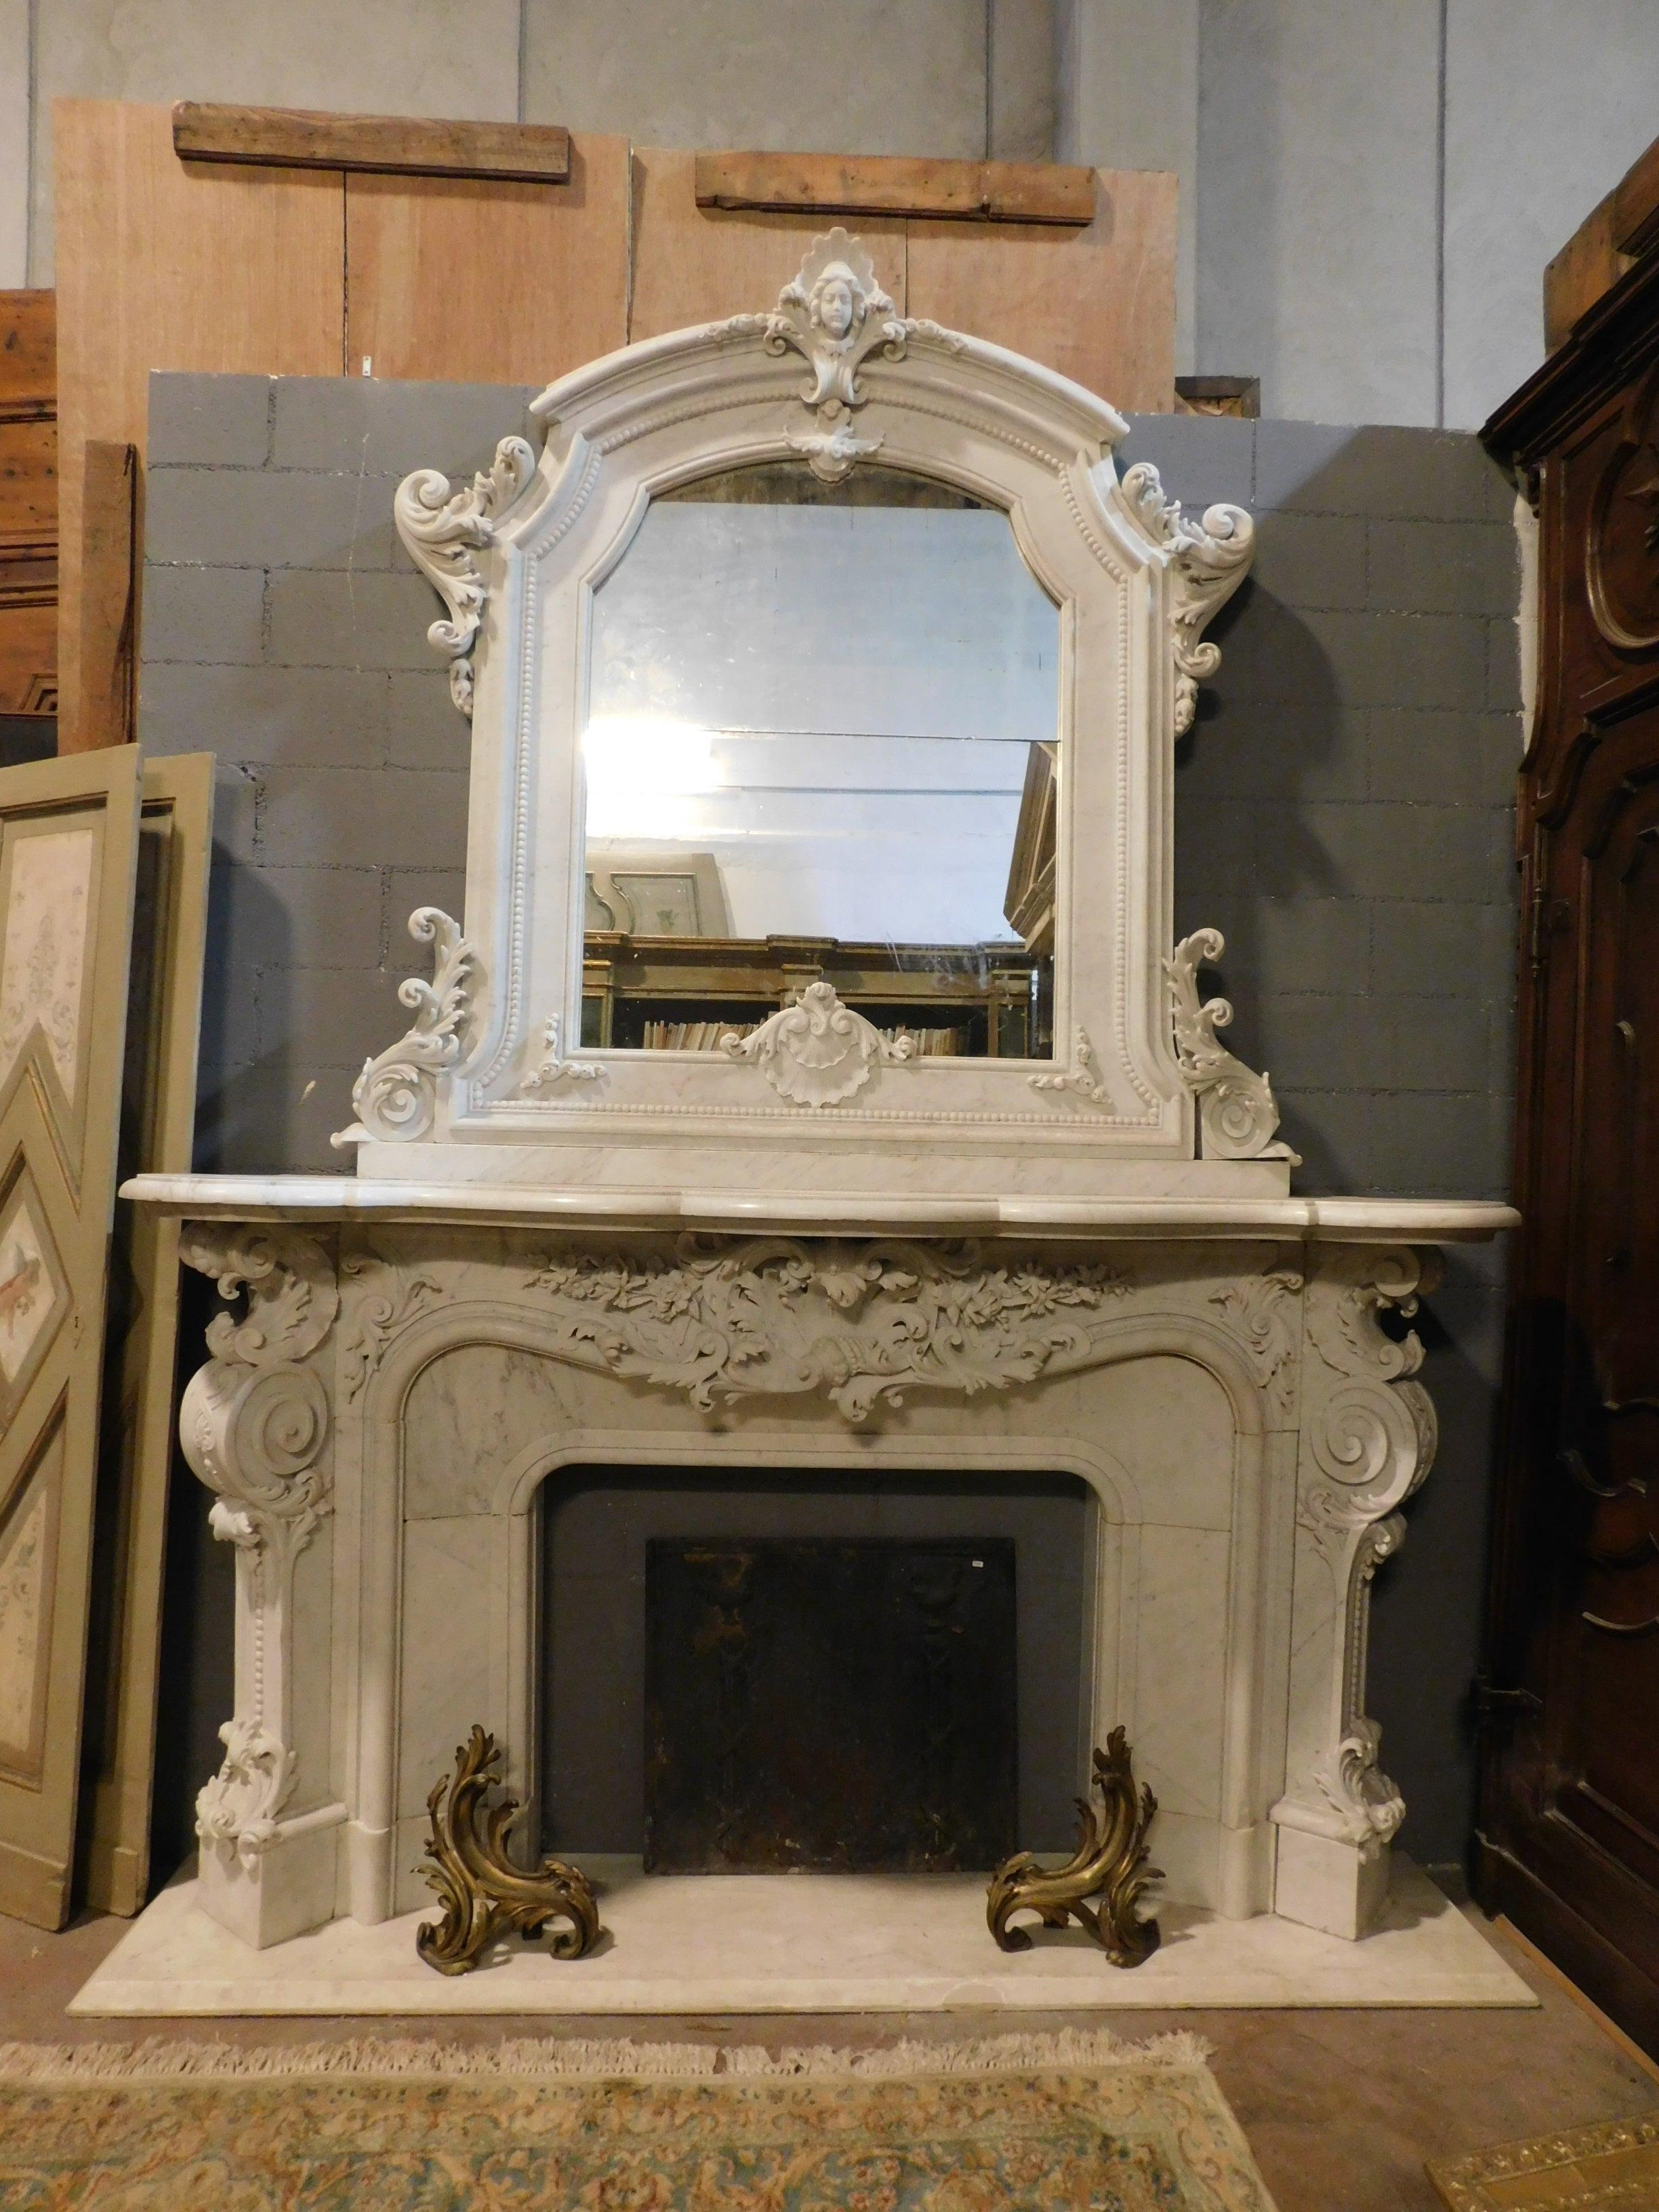 Ancient fireplace mantle in typical statuary white marble richer than Carrara marble, very rich in hand-made sculpture, with many doodles, swirls, moves and decorations, complete in everything: mirror, fireplace, base. Hand-sculpted both on the